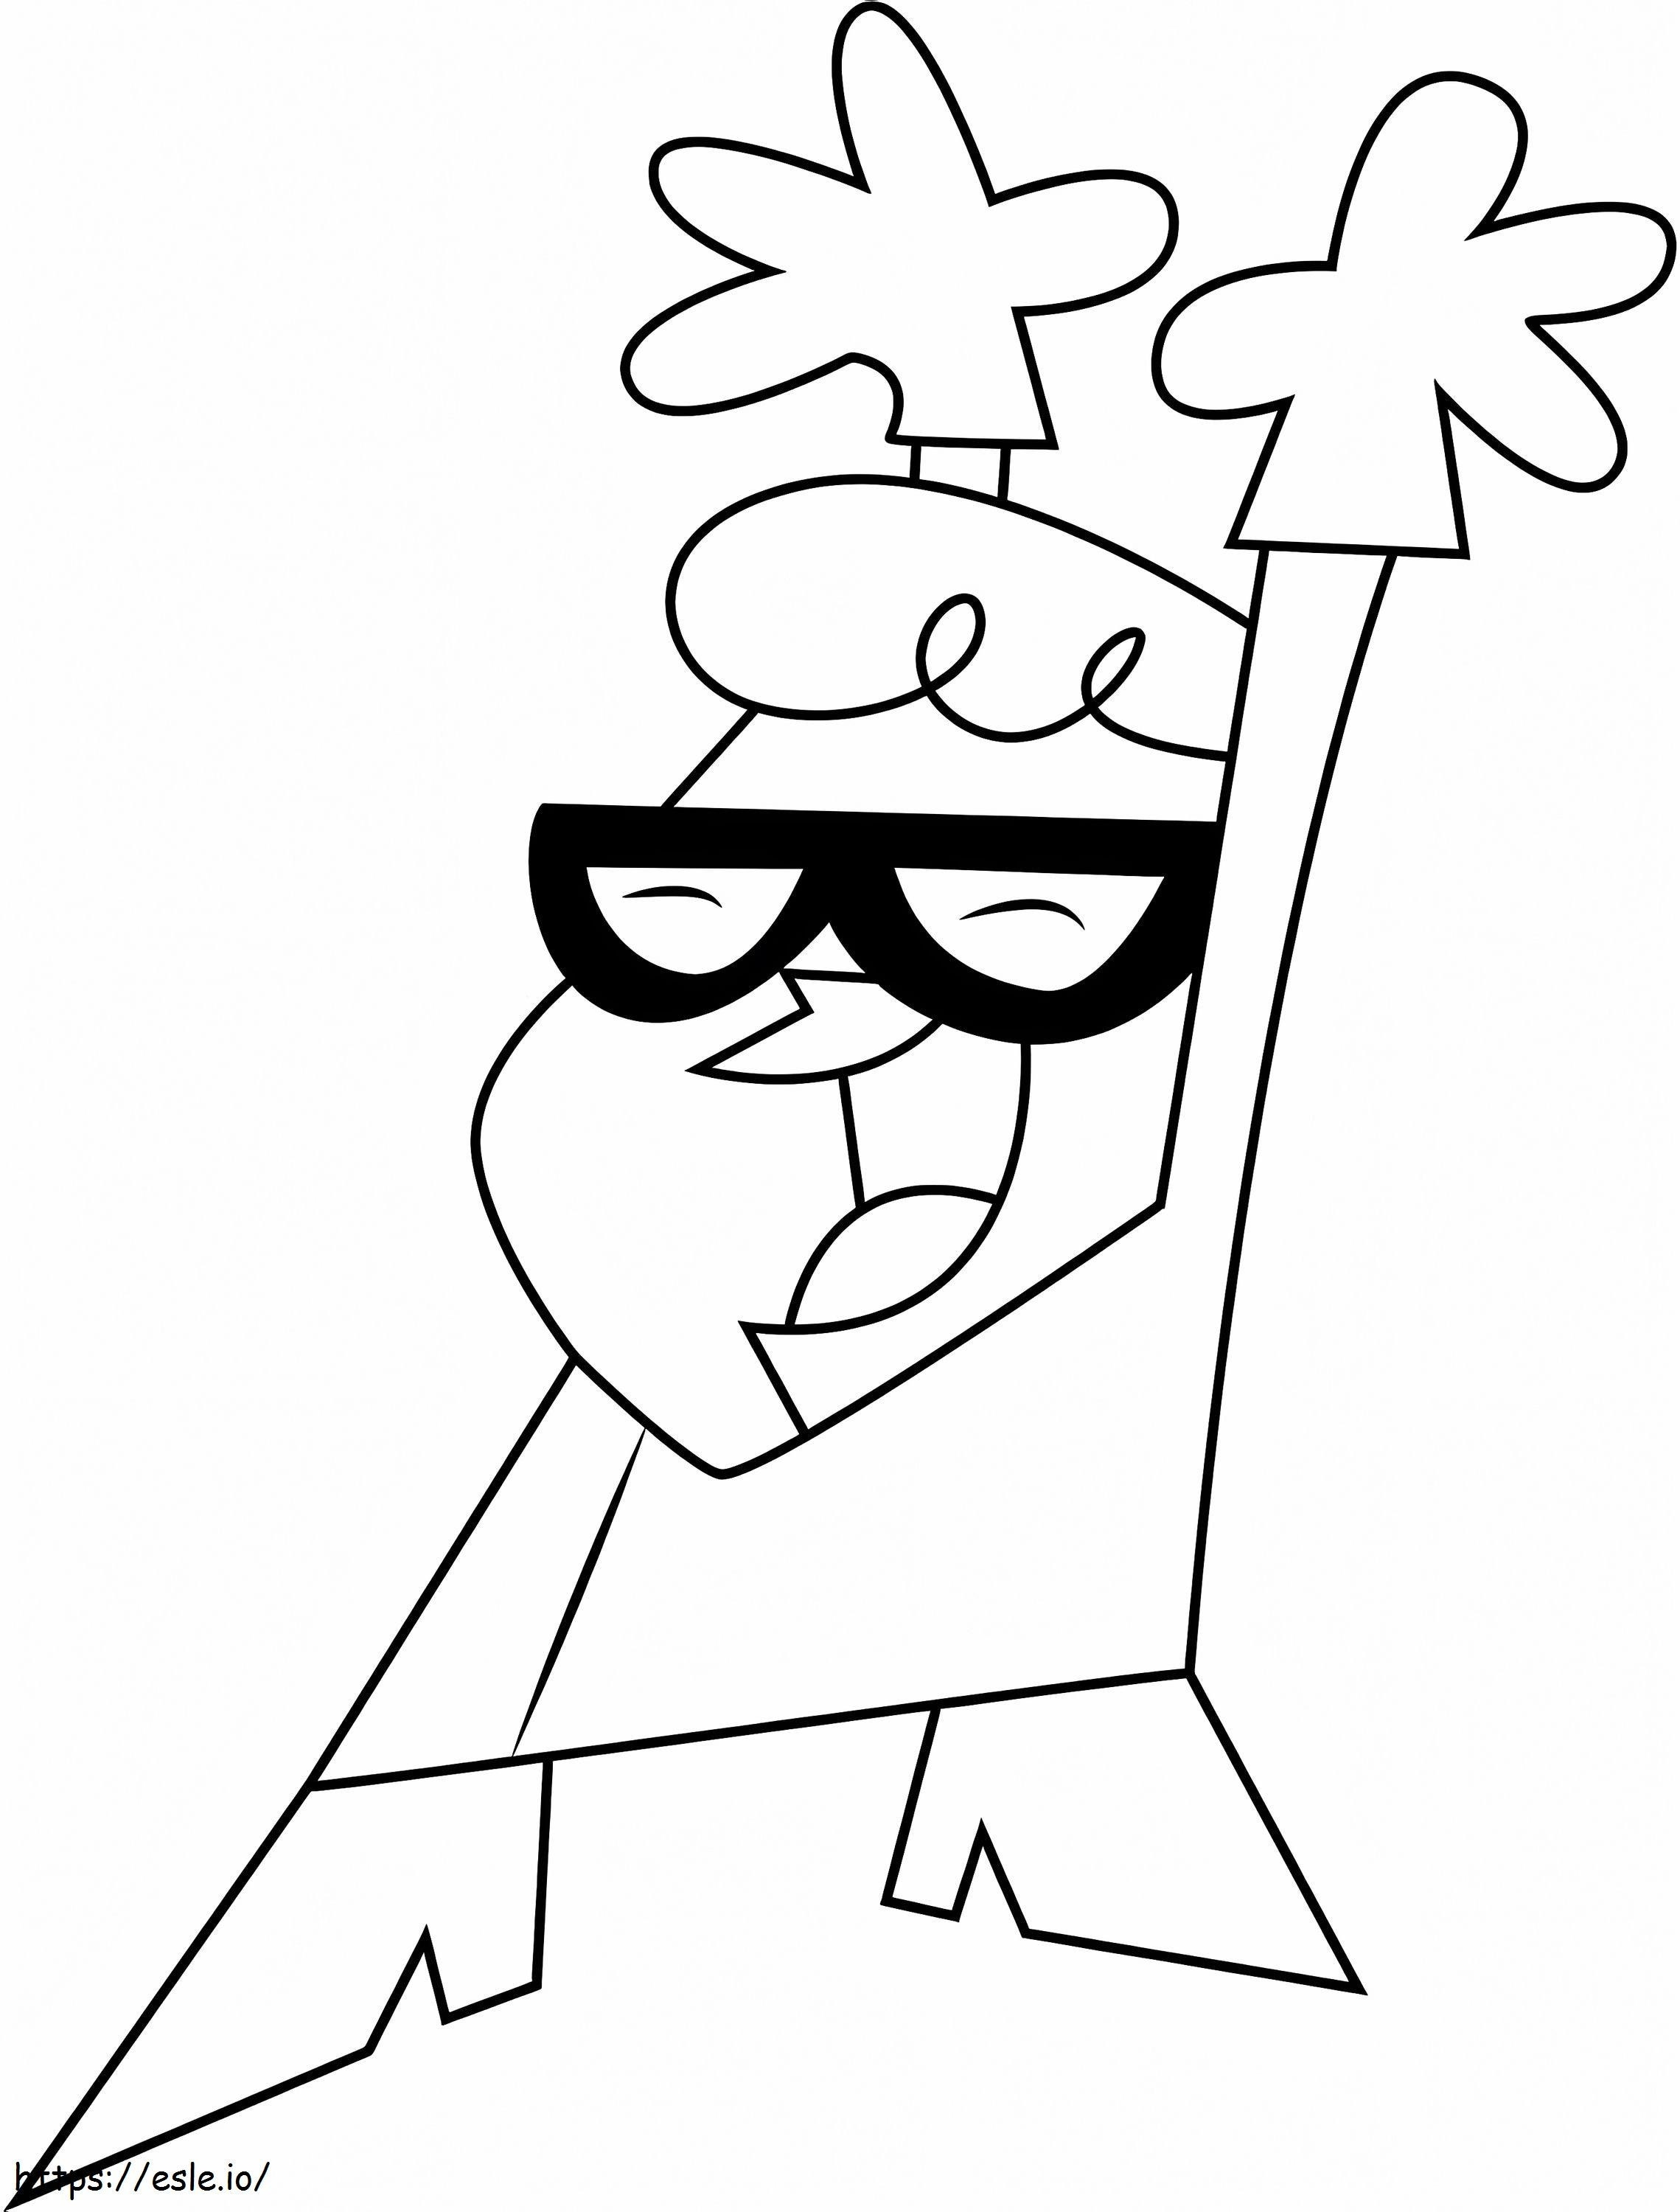 Dexter Is Happy coloring page